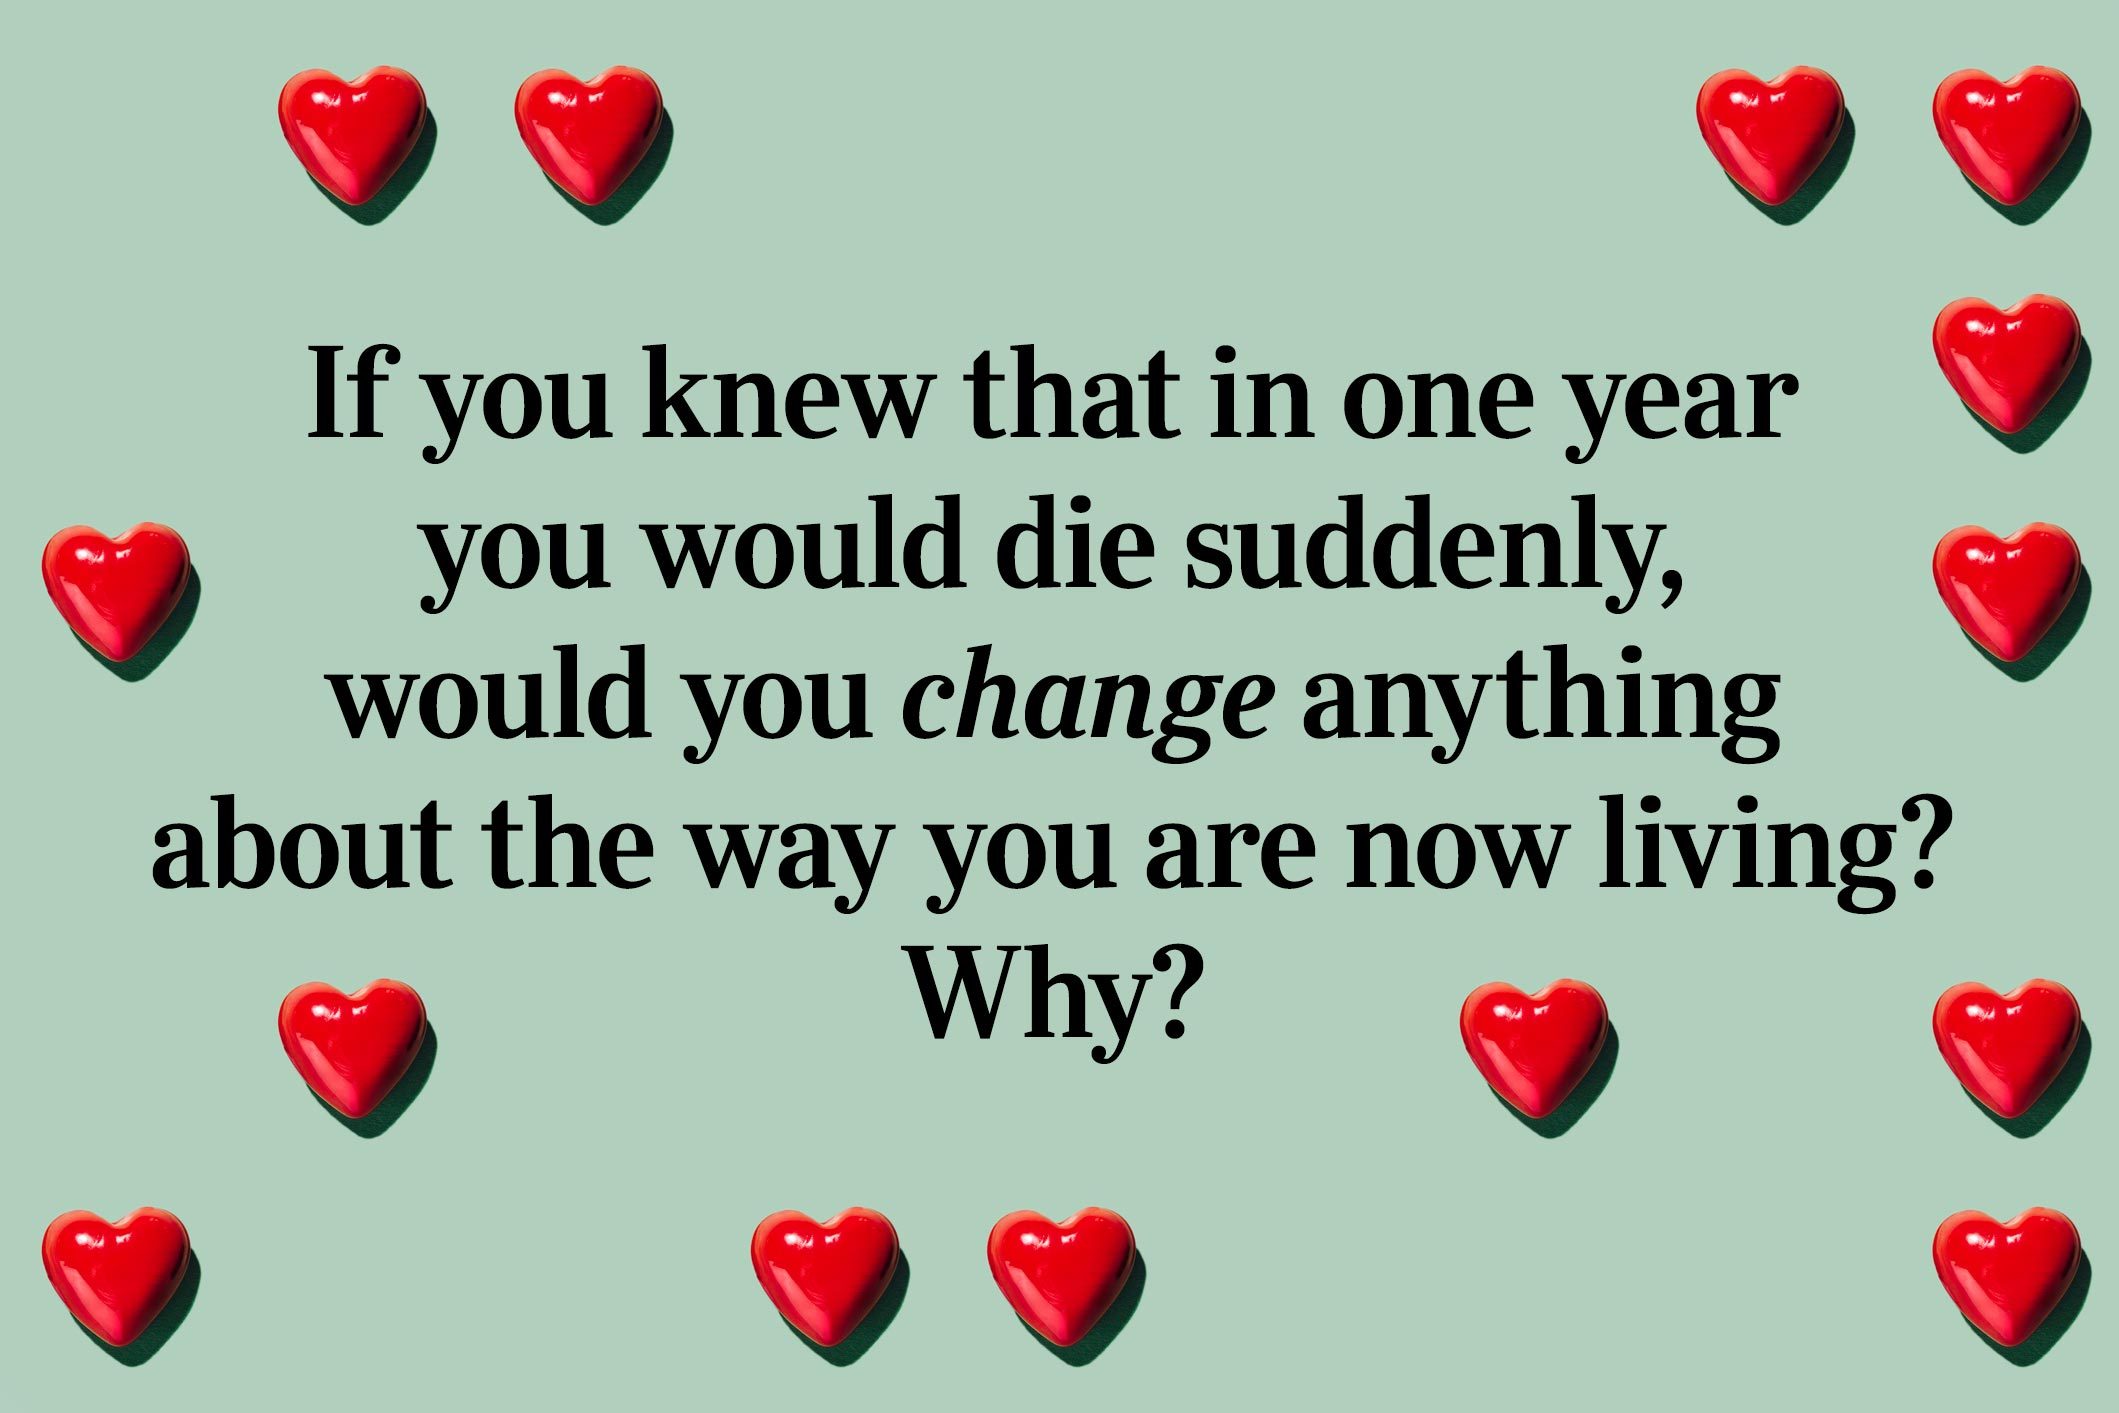 <p>If you knew that in one year you would die suddenly, would you change anything about the way you are now living? Why?</p>